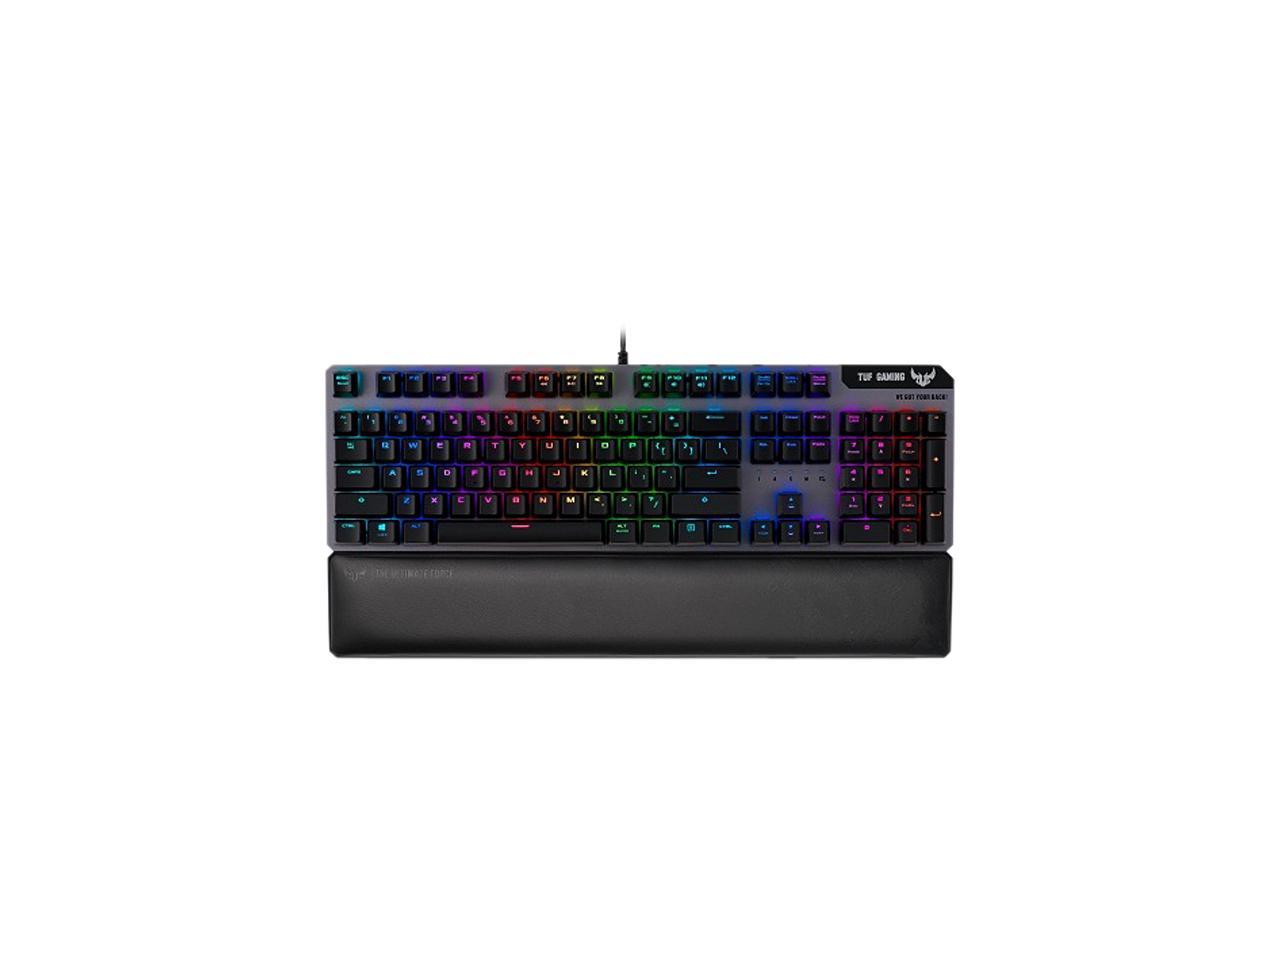 ASUS TUF Gaming K7 Optical-mech Gaming Keyboard with Tactile Switch, Detachable Wrist Rest, IP56 Waterproof Standard and Aura Sync RGB Lighting